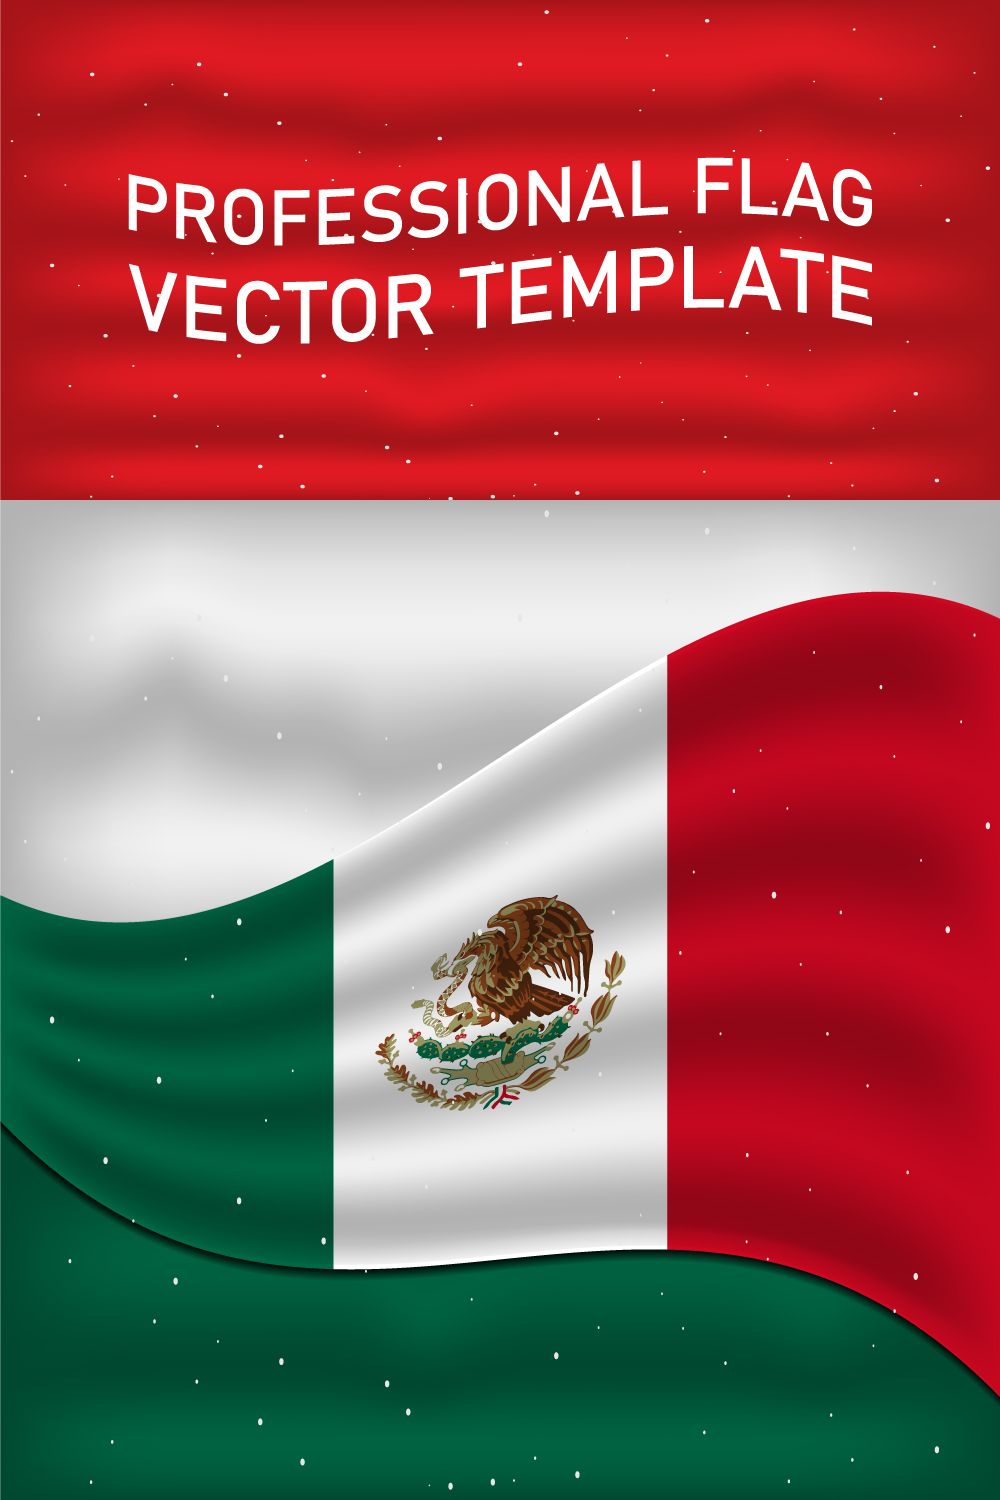 Wonderful image of the flag of Mexico.